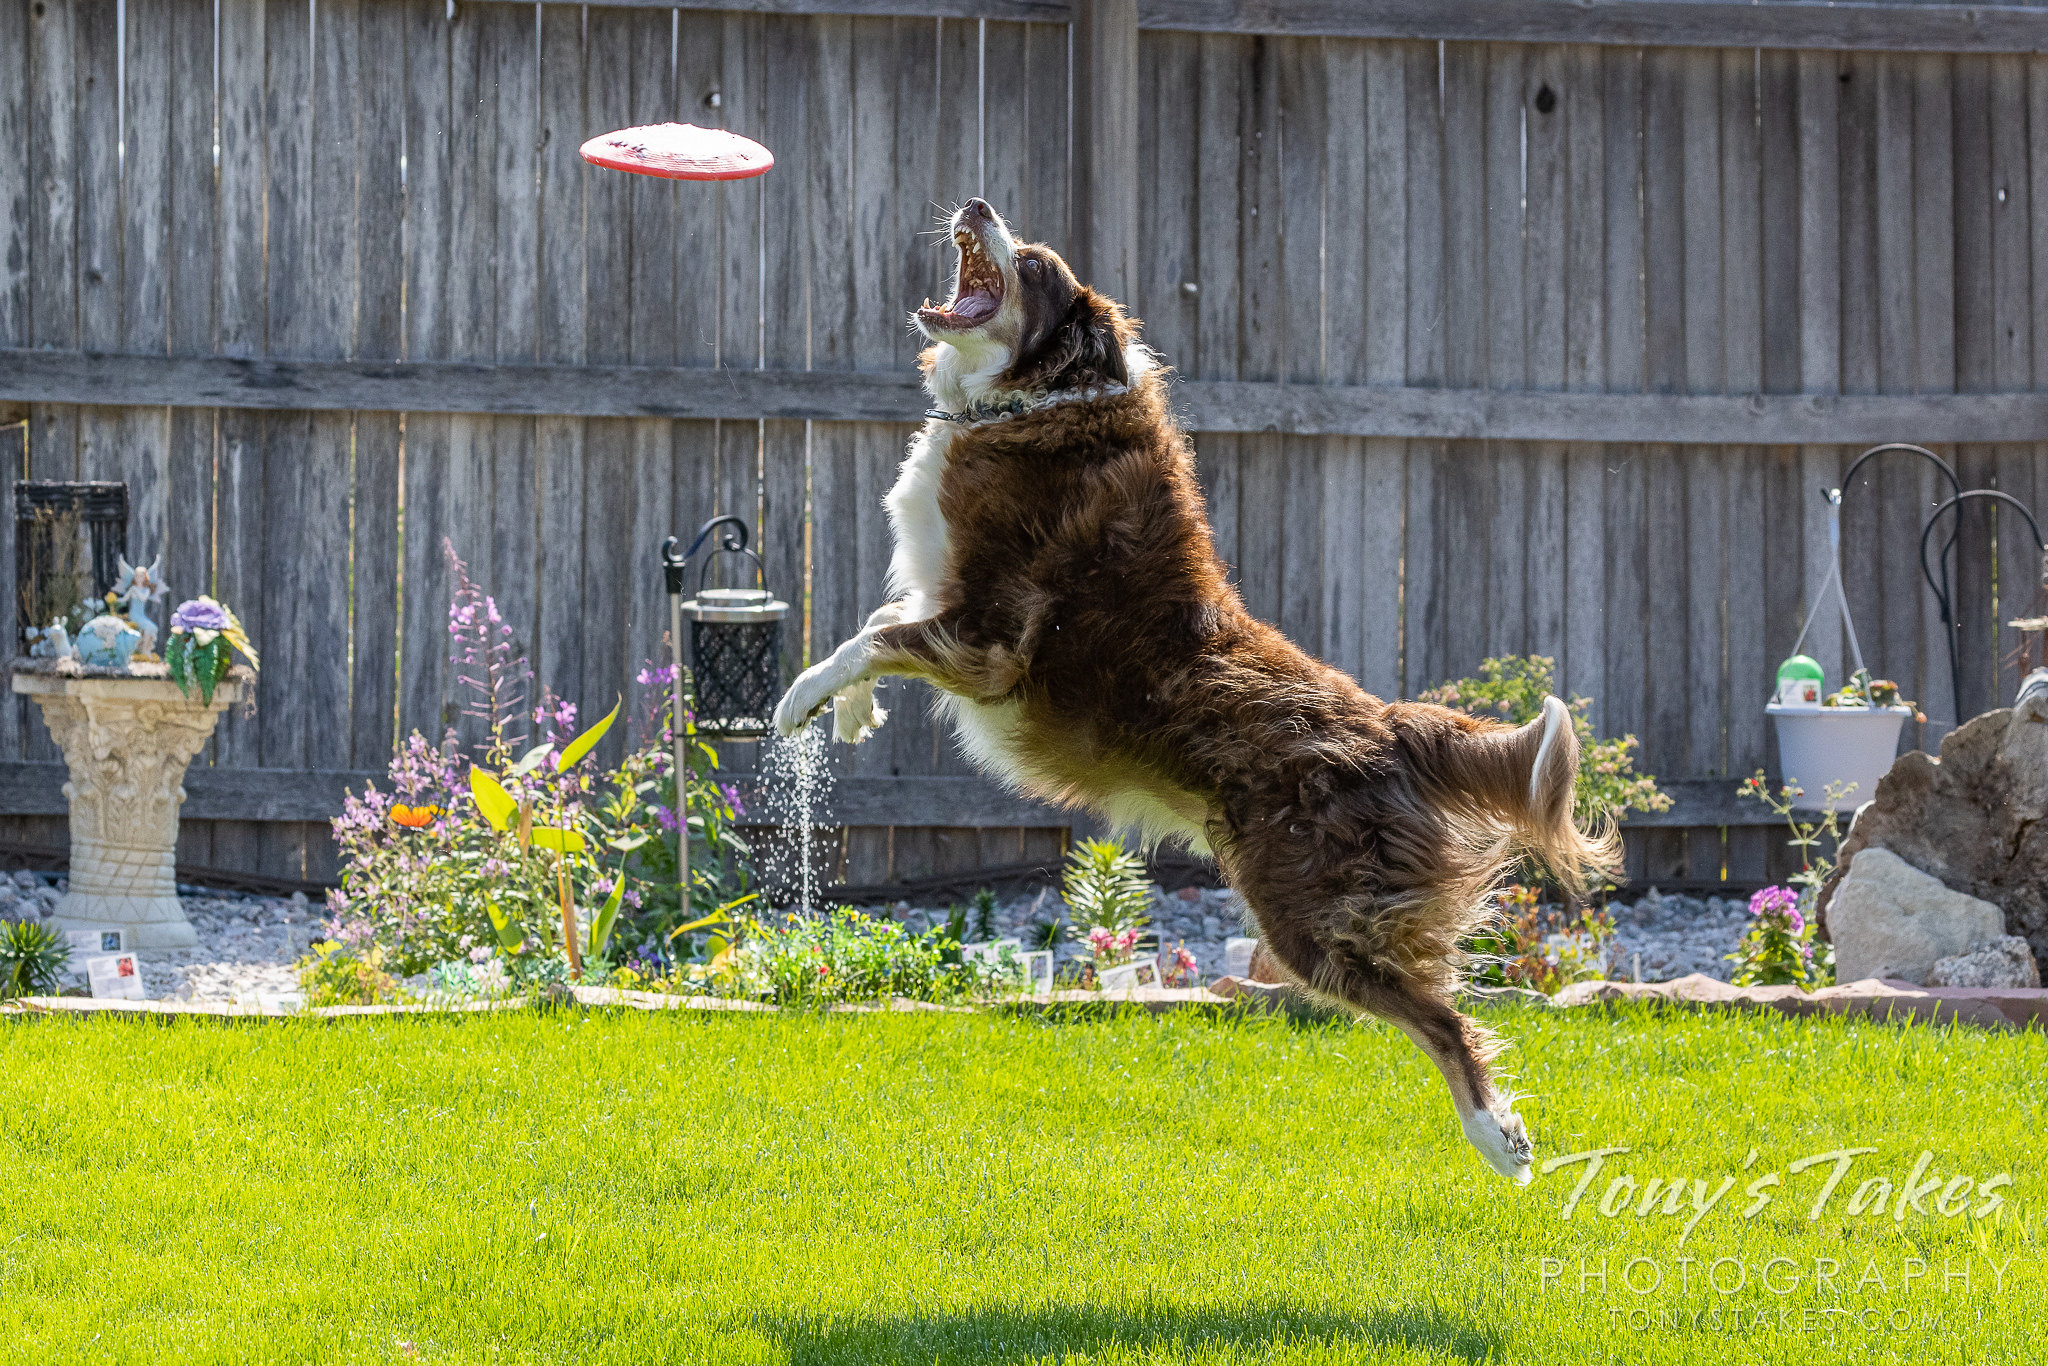 Scout, a border collie, leaps for a Frisbee. (© Tony's Takes)